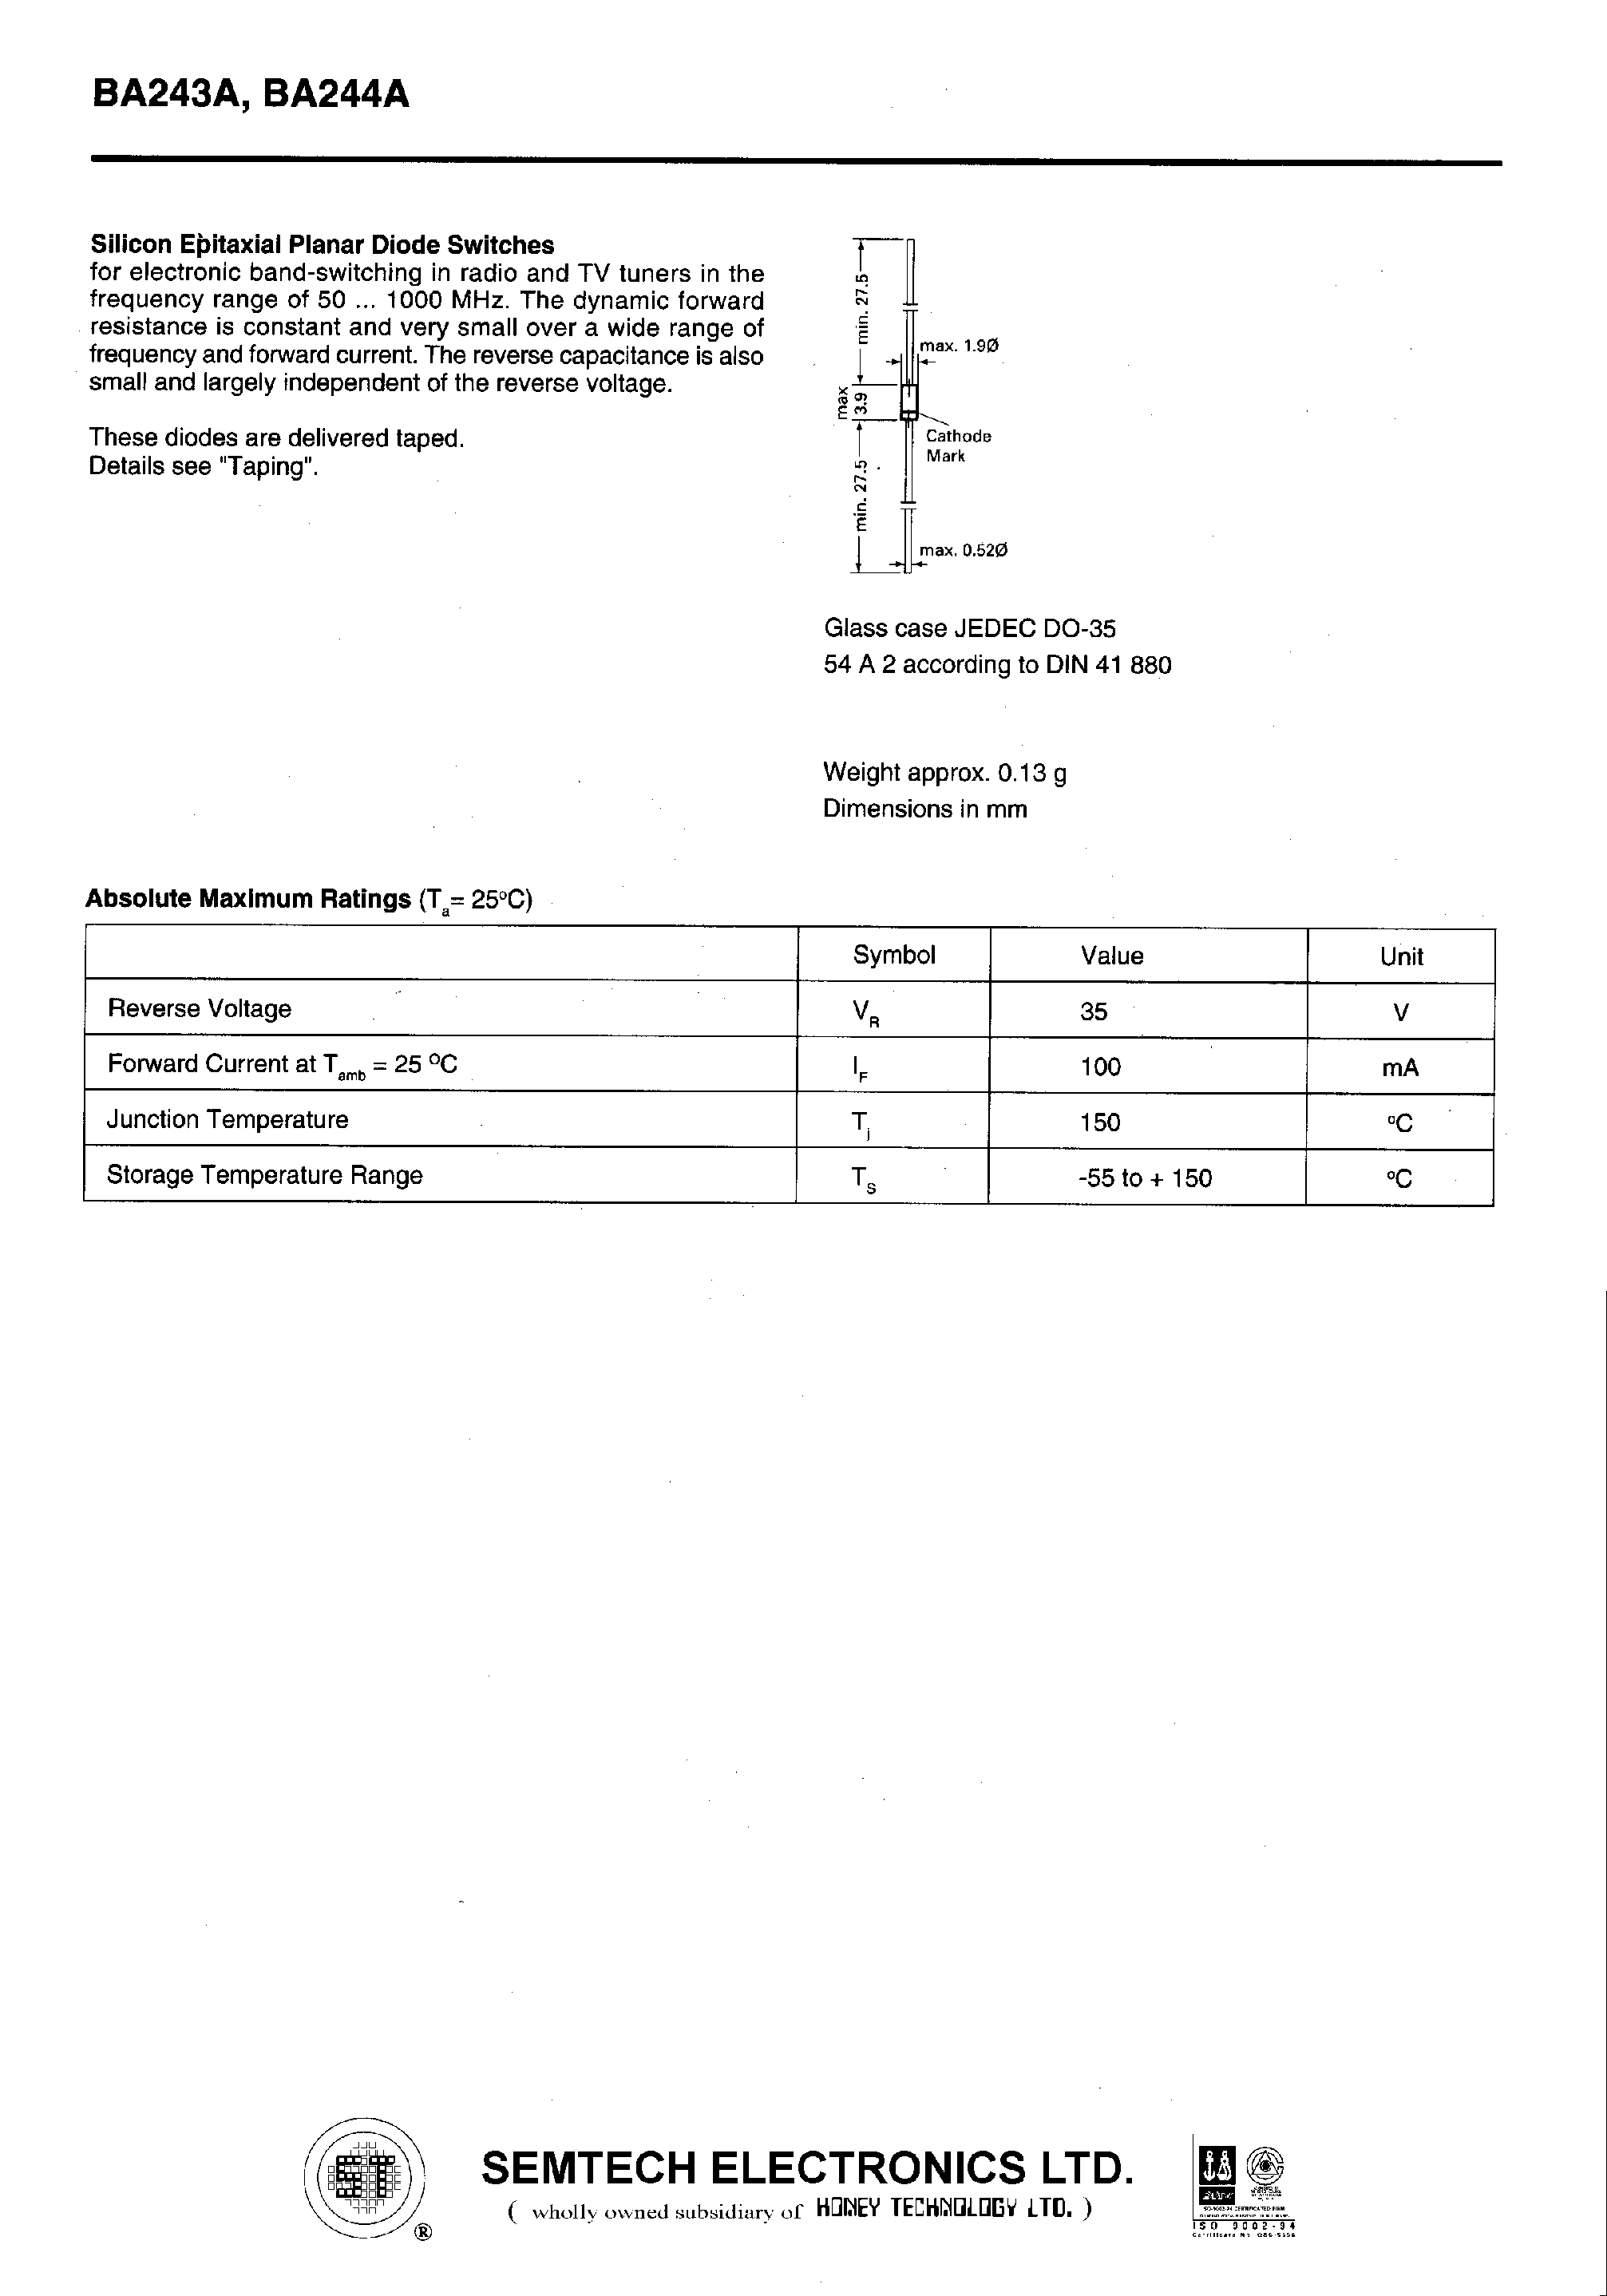 Datasheet BA243 - Silicon Epitaxial Planar Diode Switches page 1